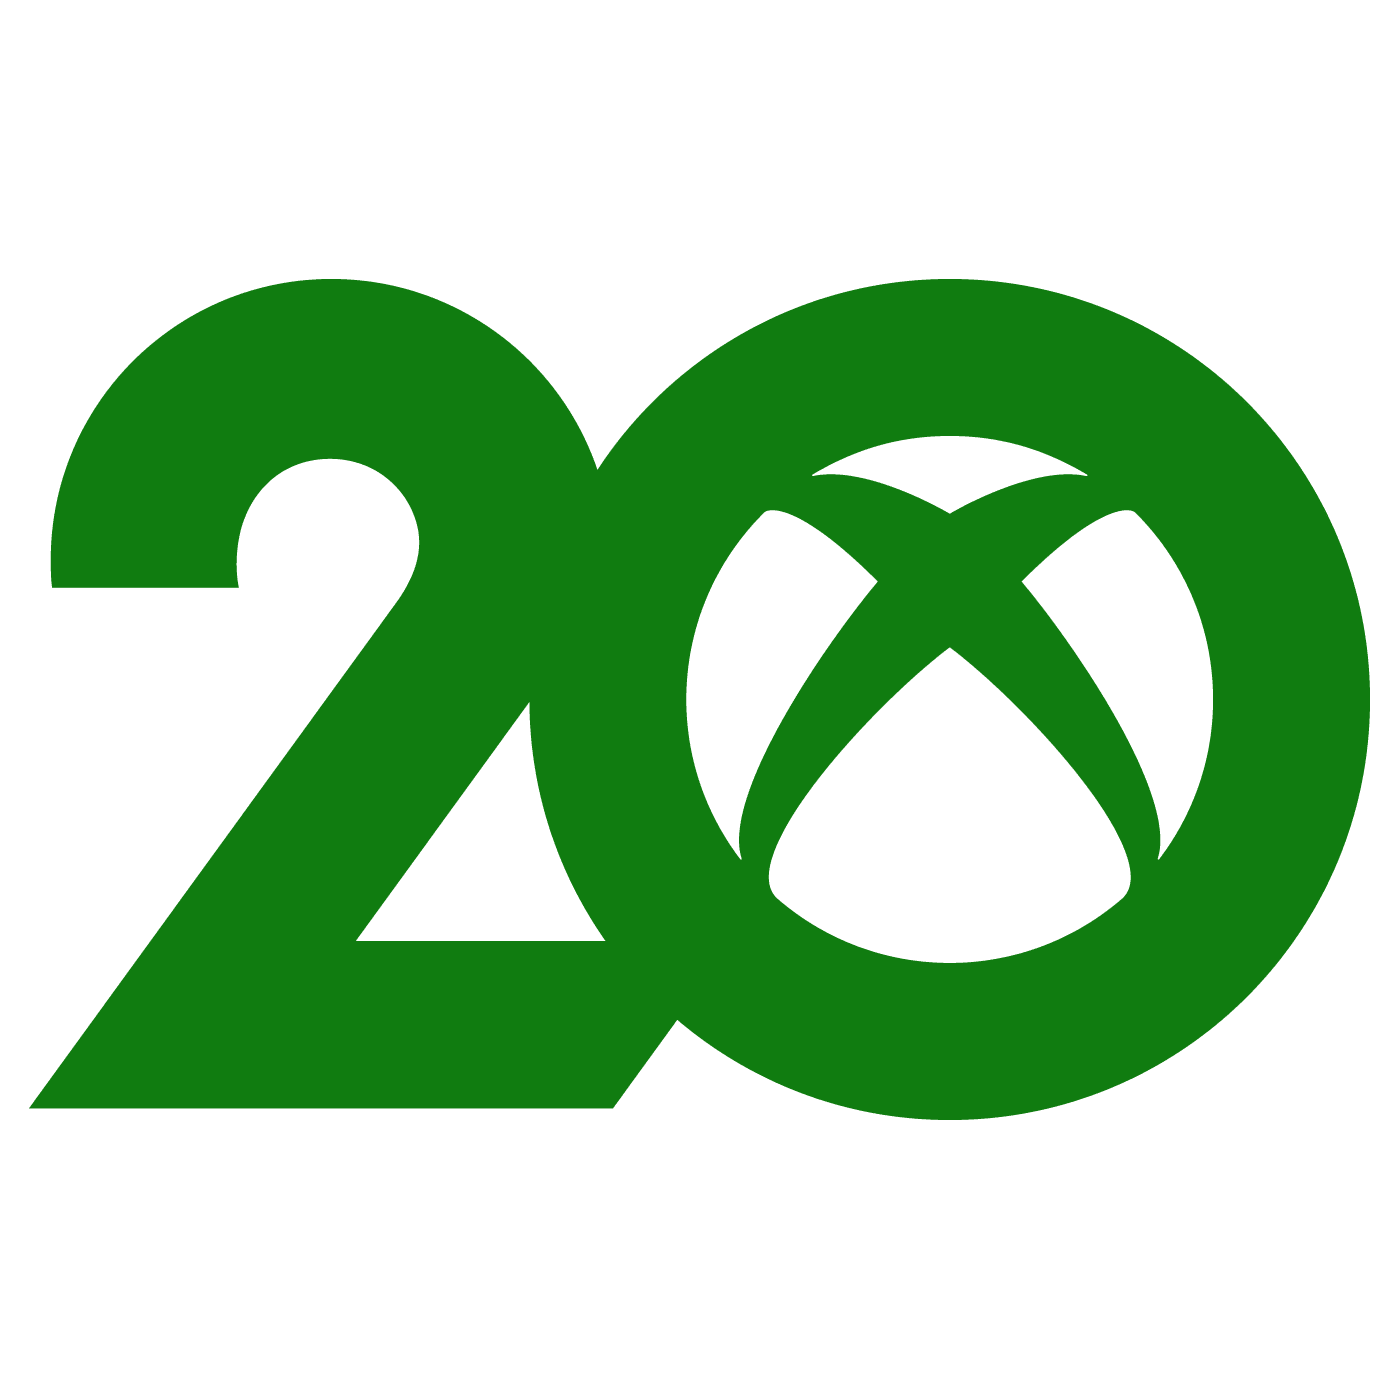 20 Years of Xbox FanFest Halo 3 Tournament